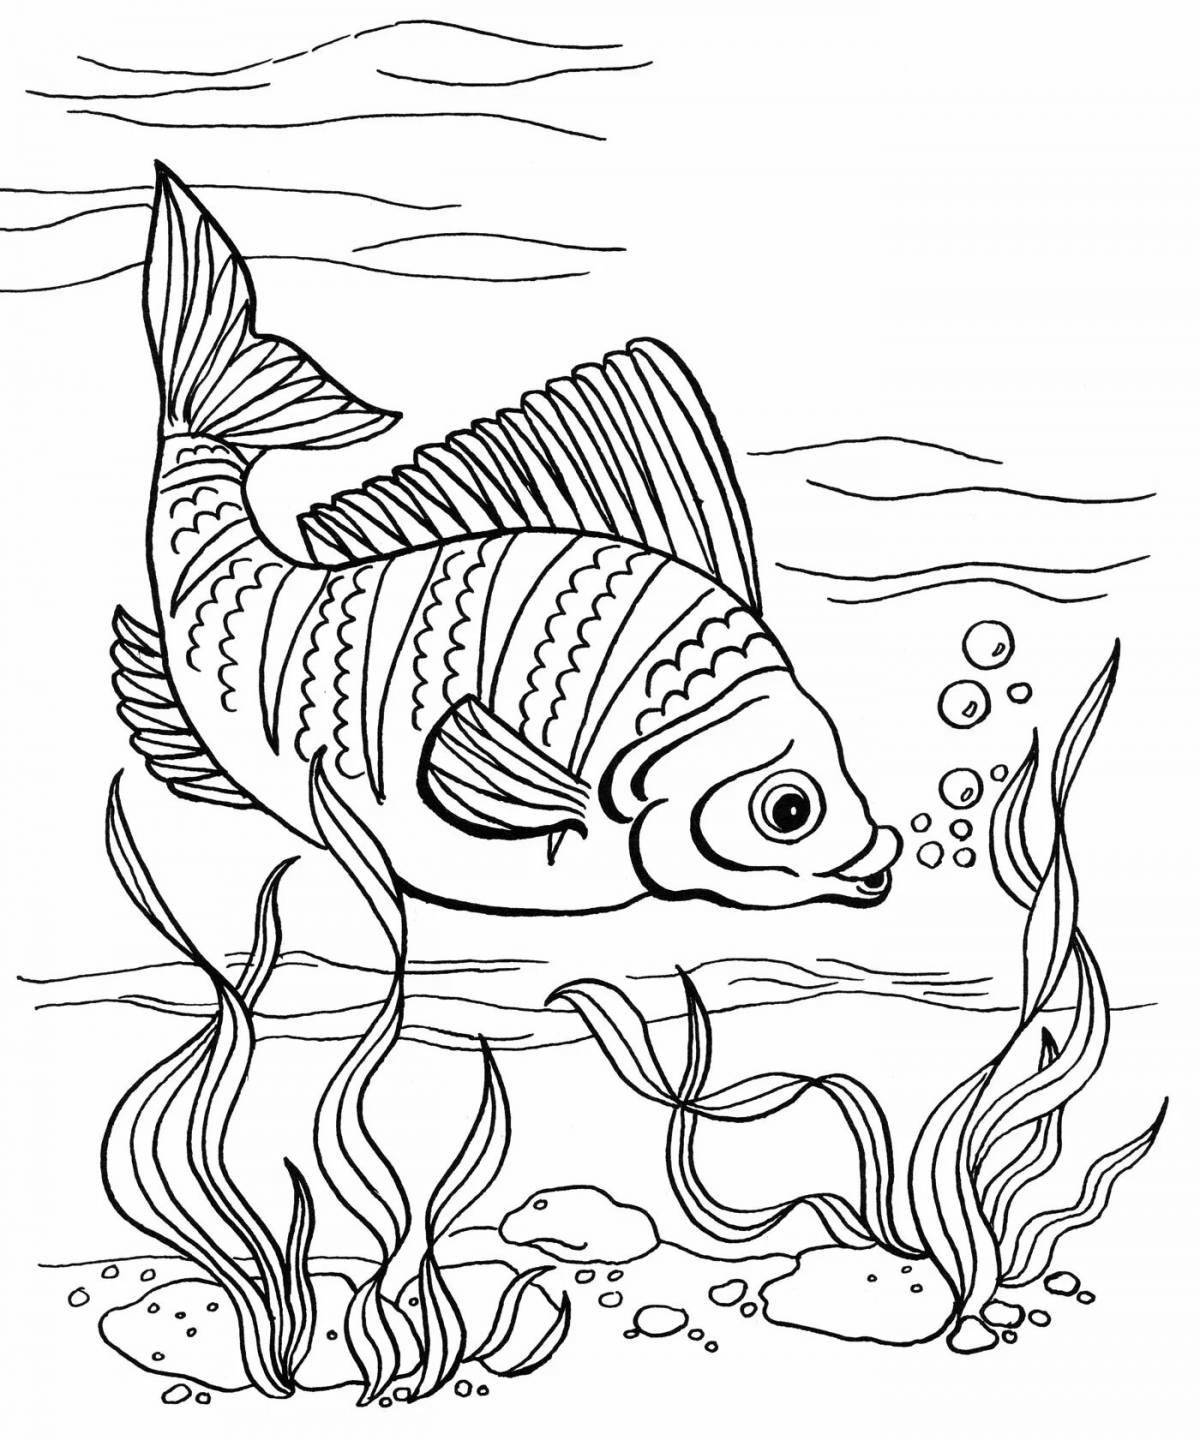 Exciting river fish coloring page